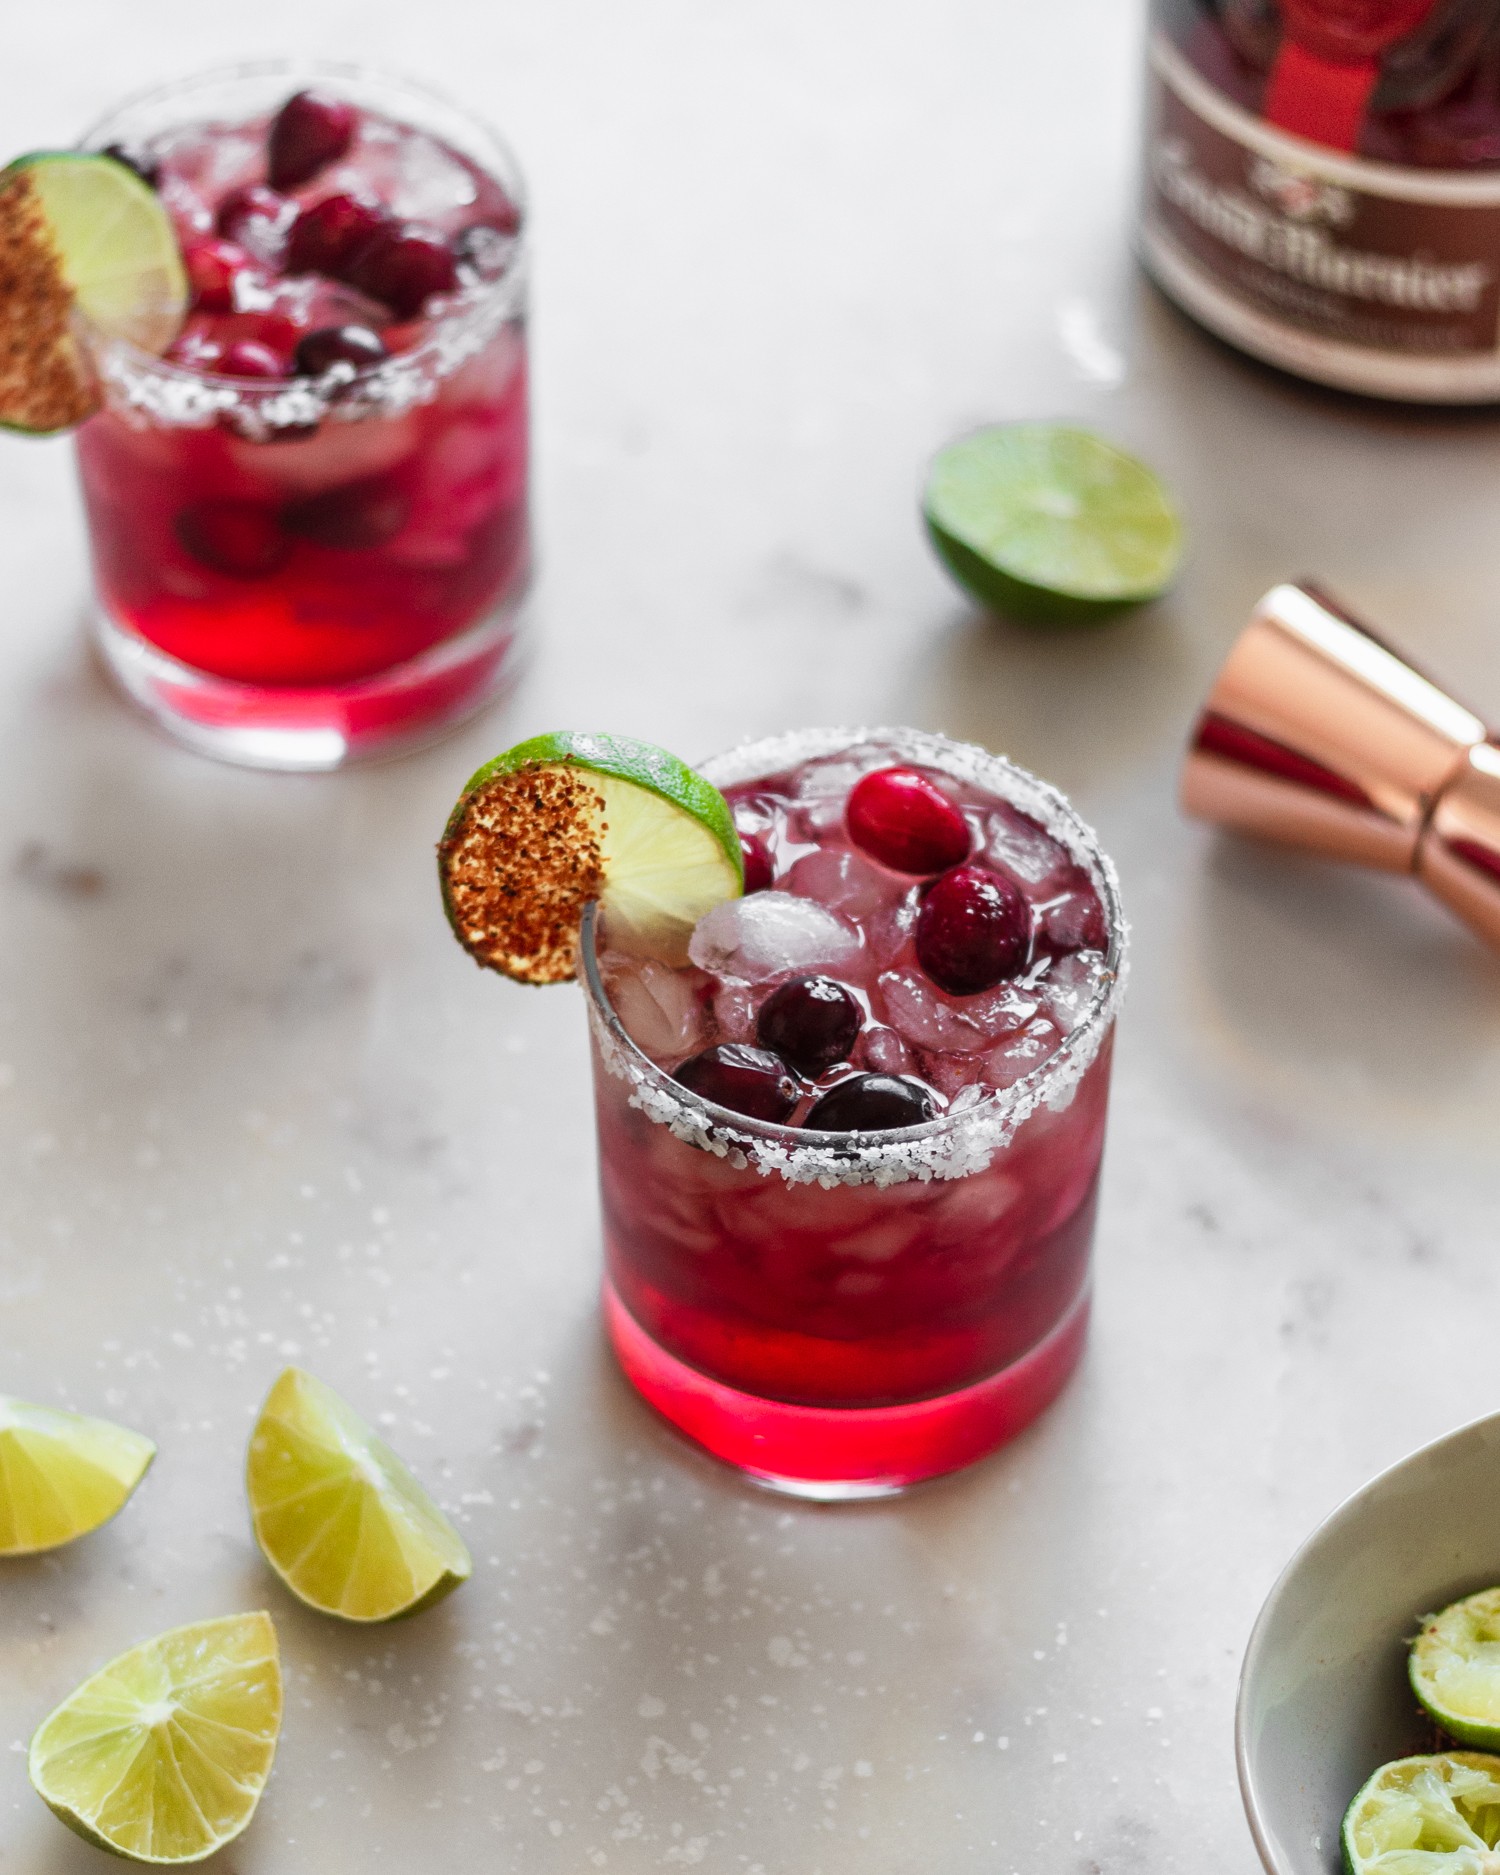 A 45 degree shot of a cranberry margarita on a white marble table surrounded by additional margaritas, a copper shot glass, a bottle of Grand Marnier, and limes.